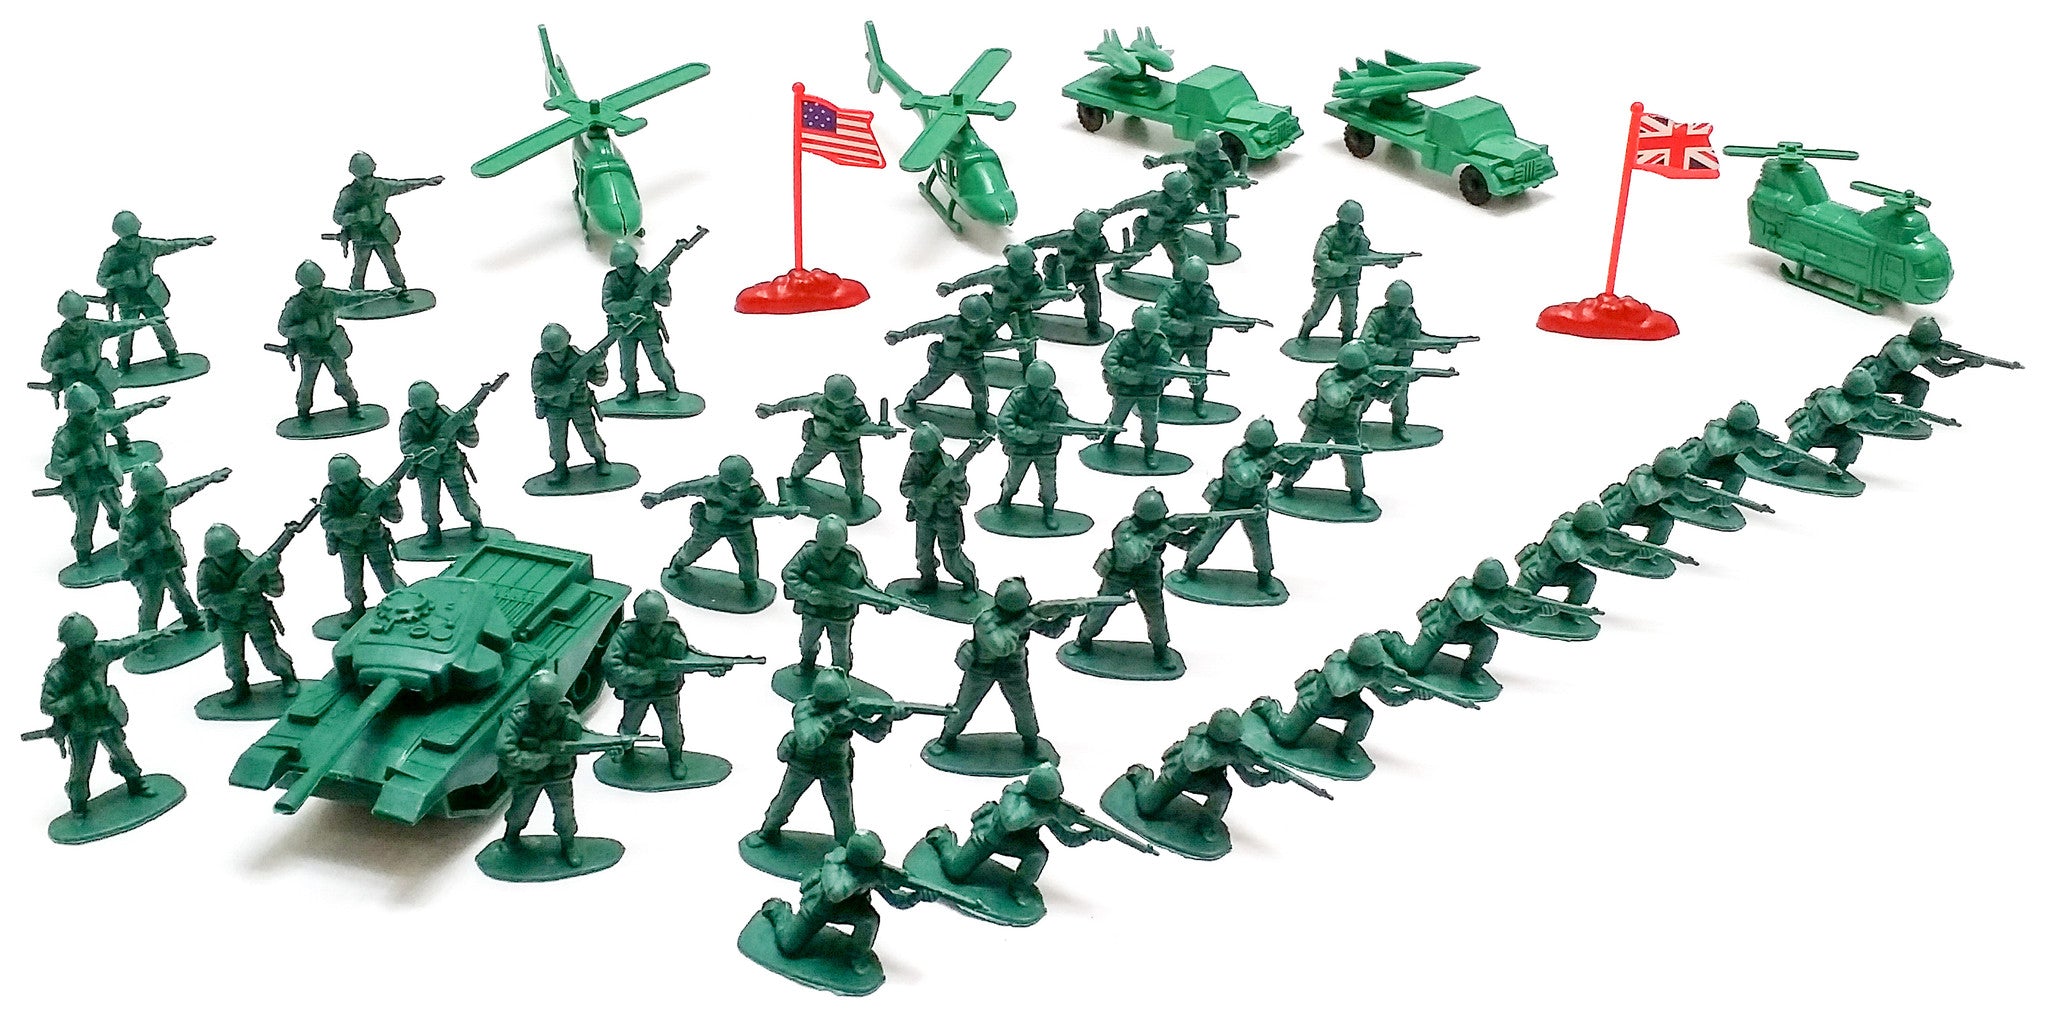 Viahart 140+ Action Figures Army Men Toy Soldier Play Set With Tanks